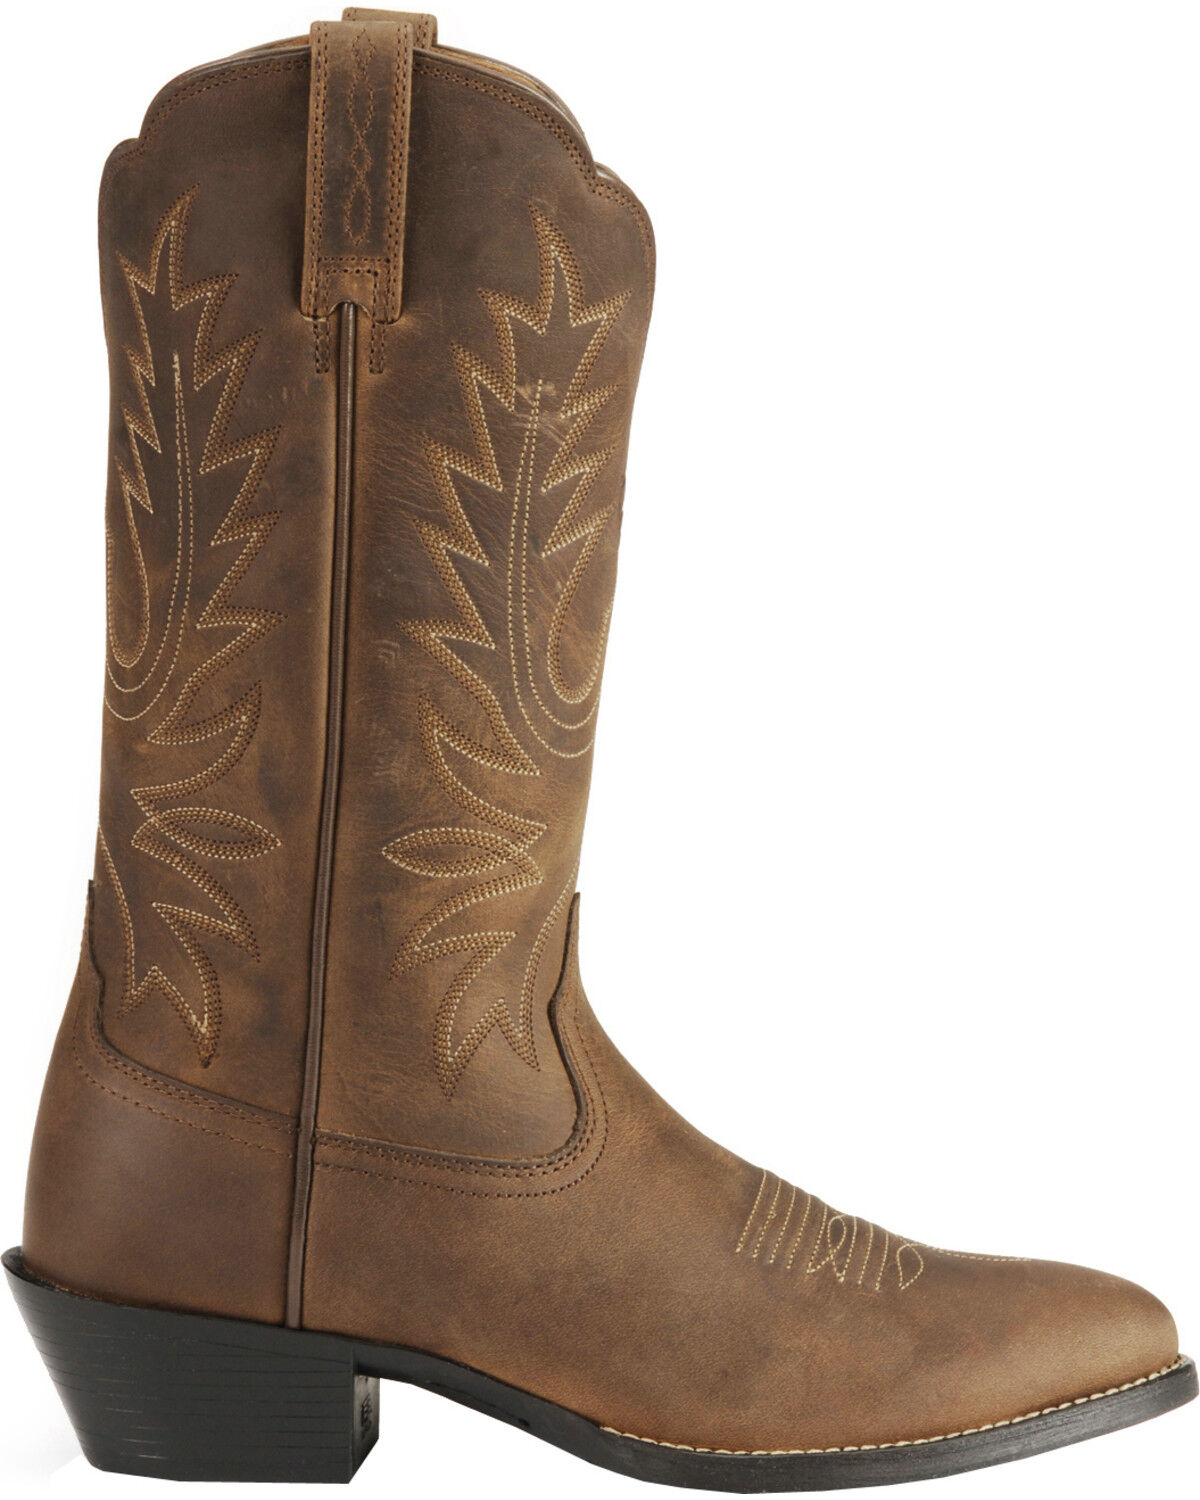 Ariat Women's Heritage Western R Toe Leather Cowgirl Boots